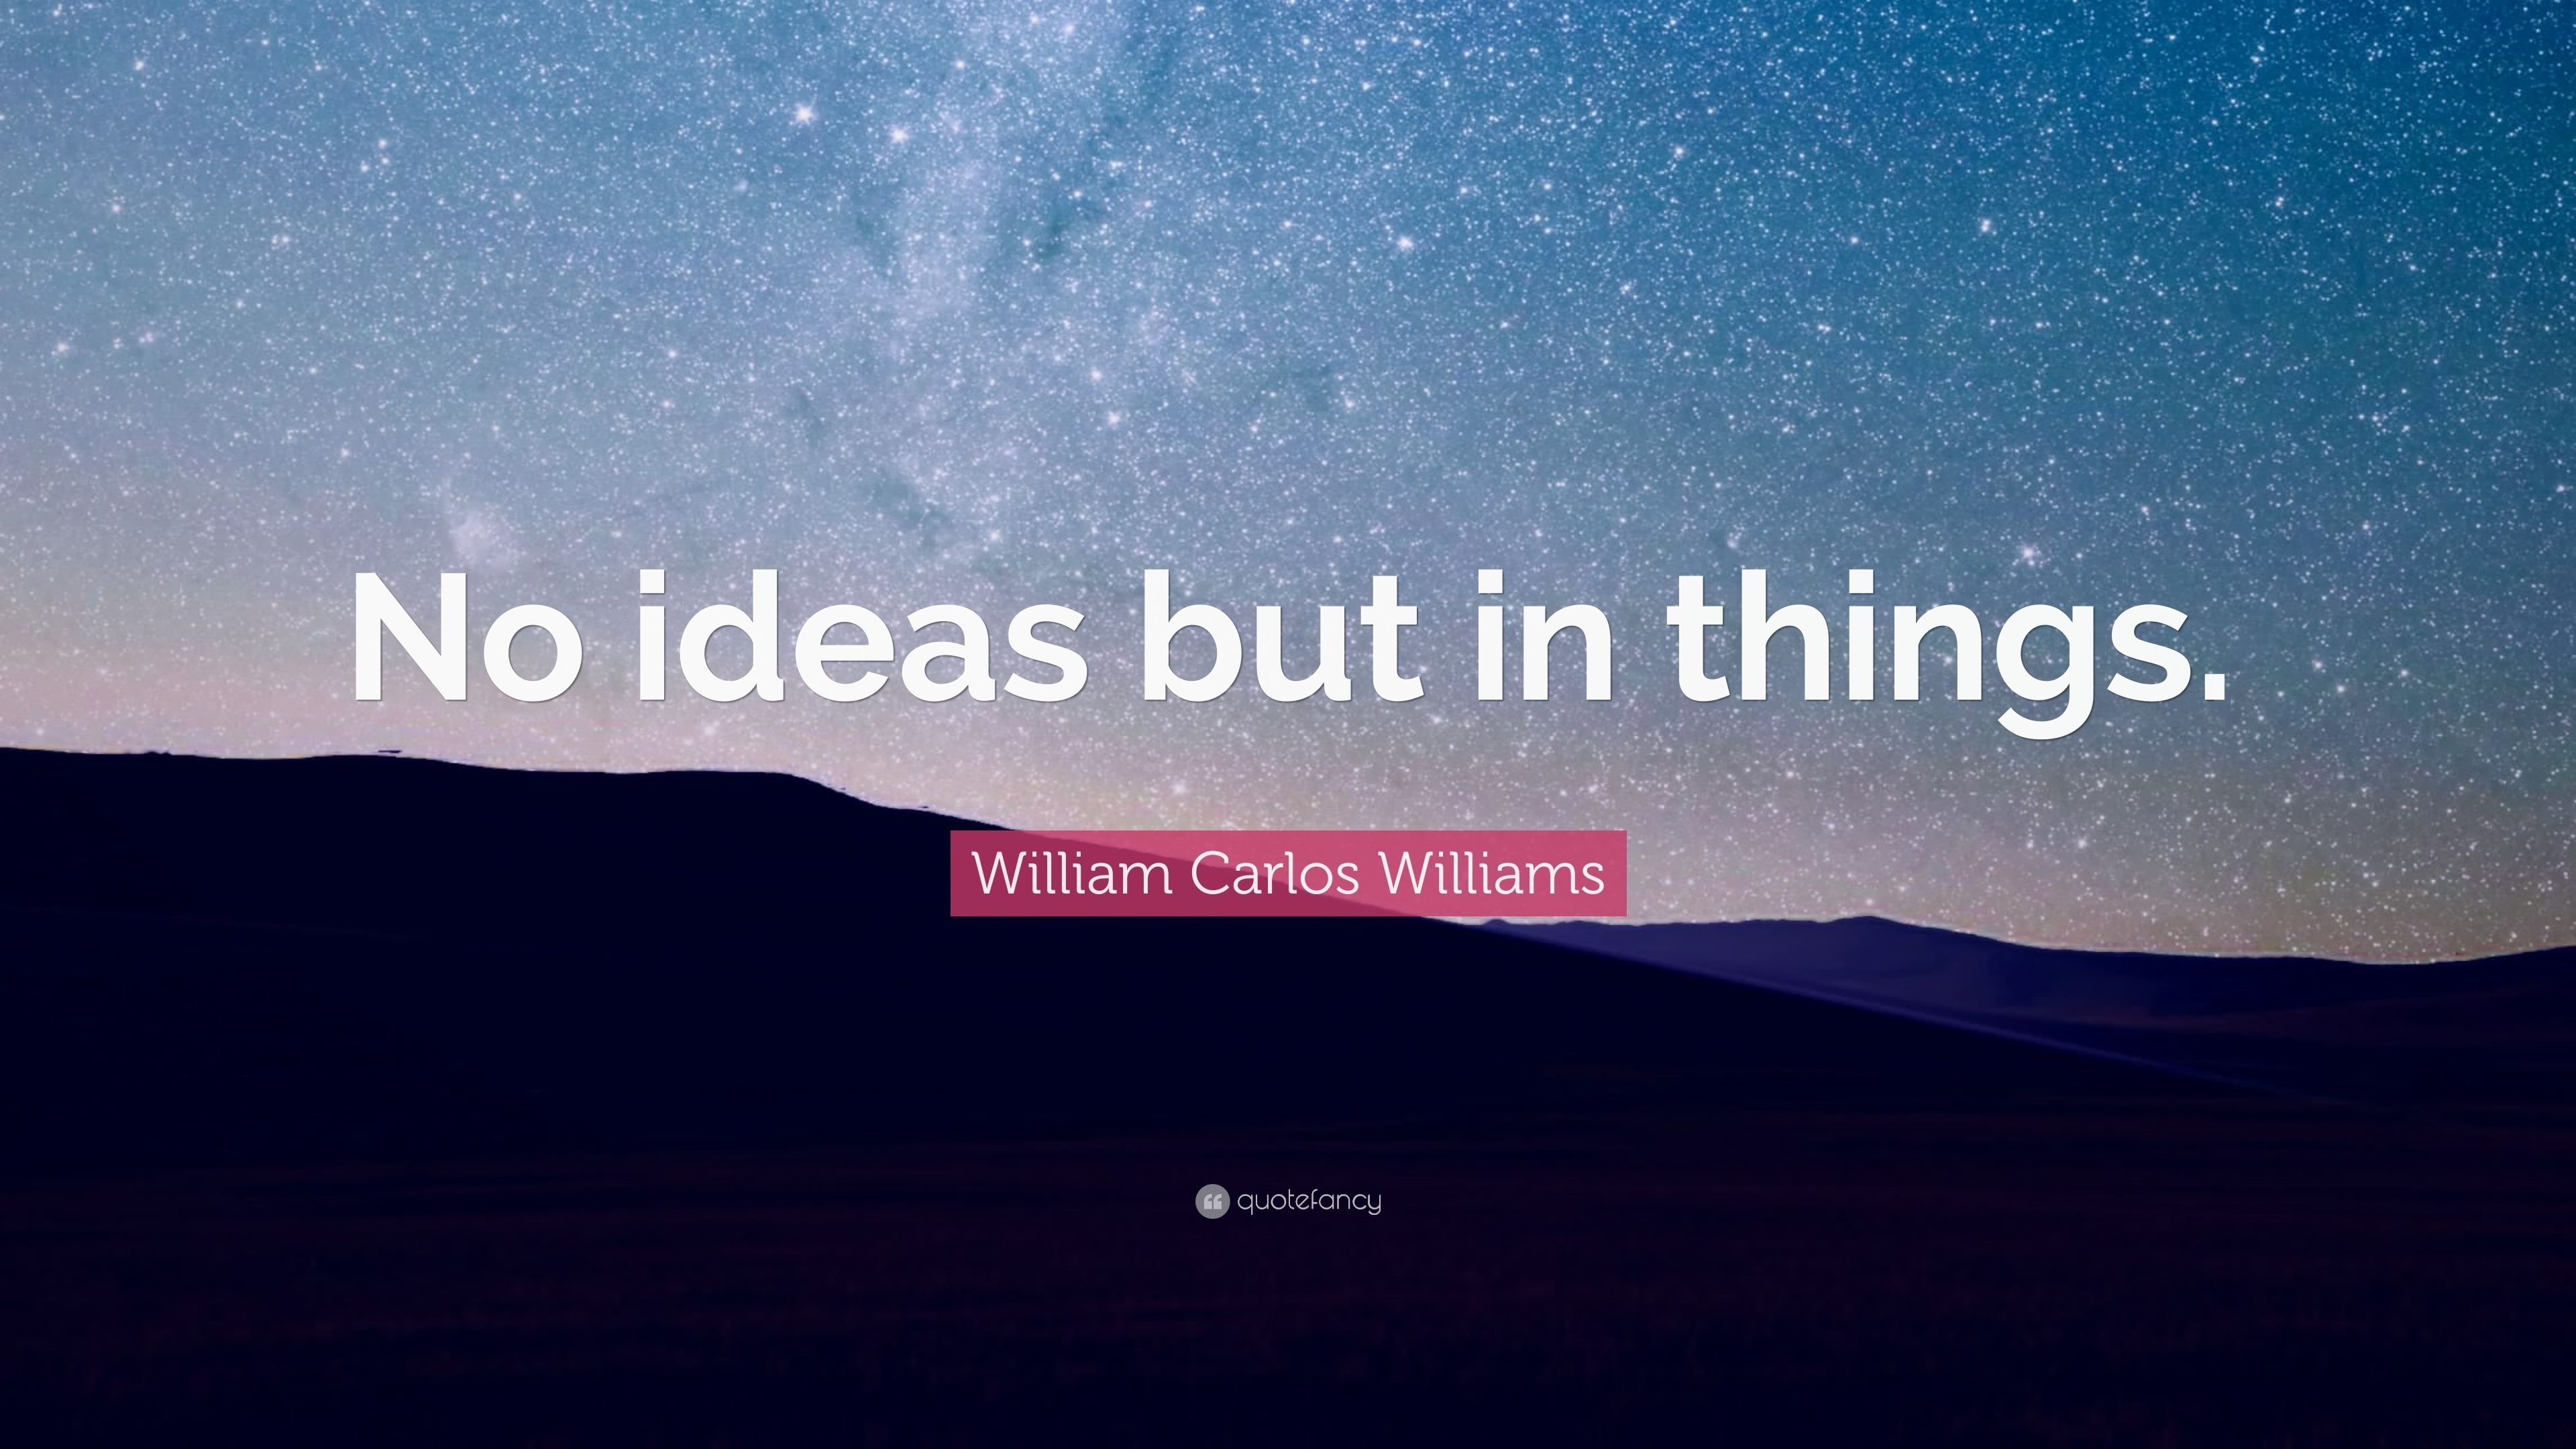 10 Fabulous No Ideas But In Things william carlos williams quote no ideas but in things 7 1 2022